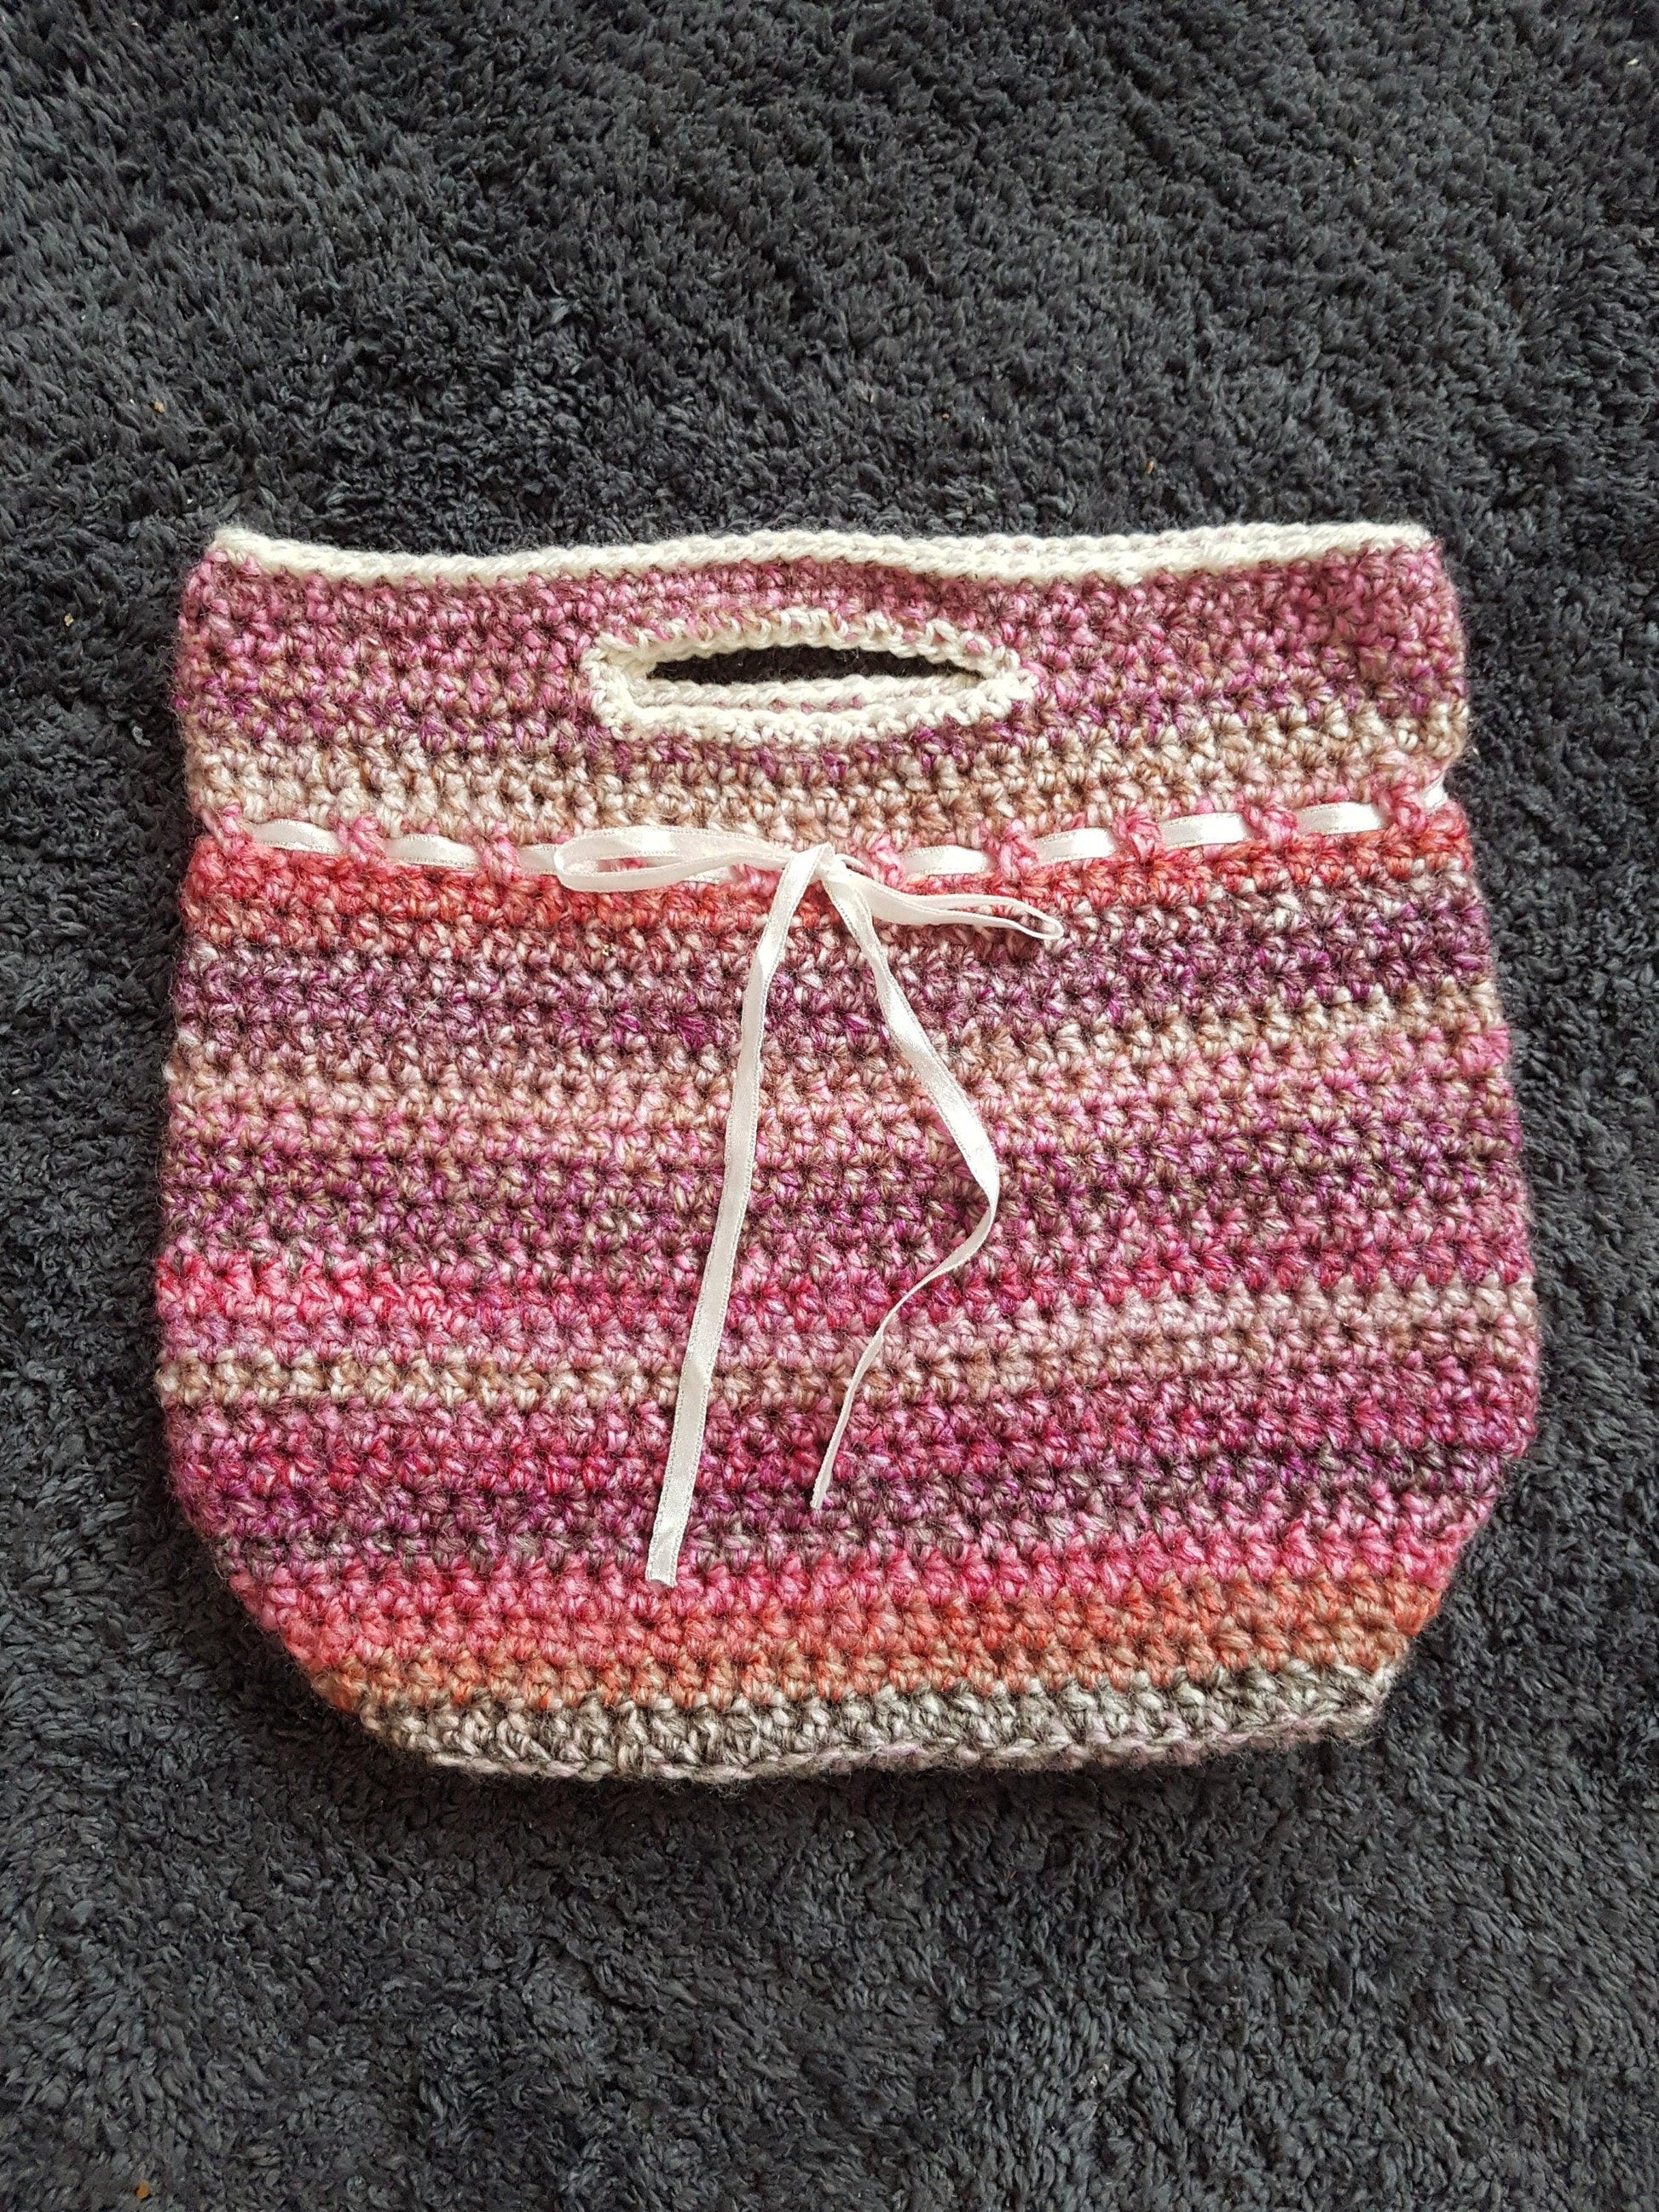 Handmade crochet handbag in mixed pink yarn. Front of the bag shown laid flat on the floor to illustrate detail